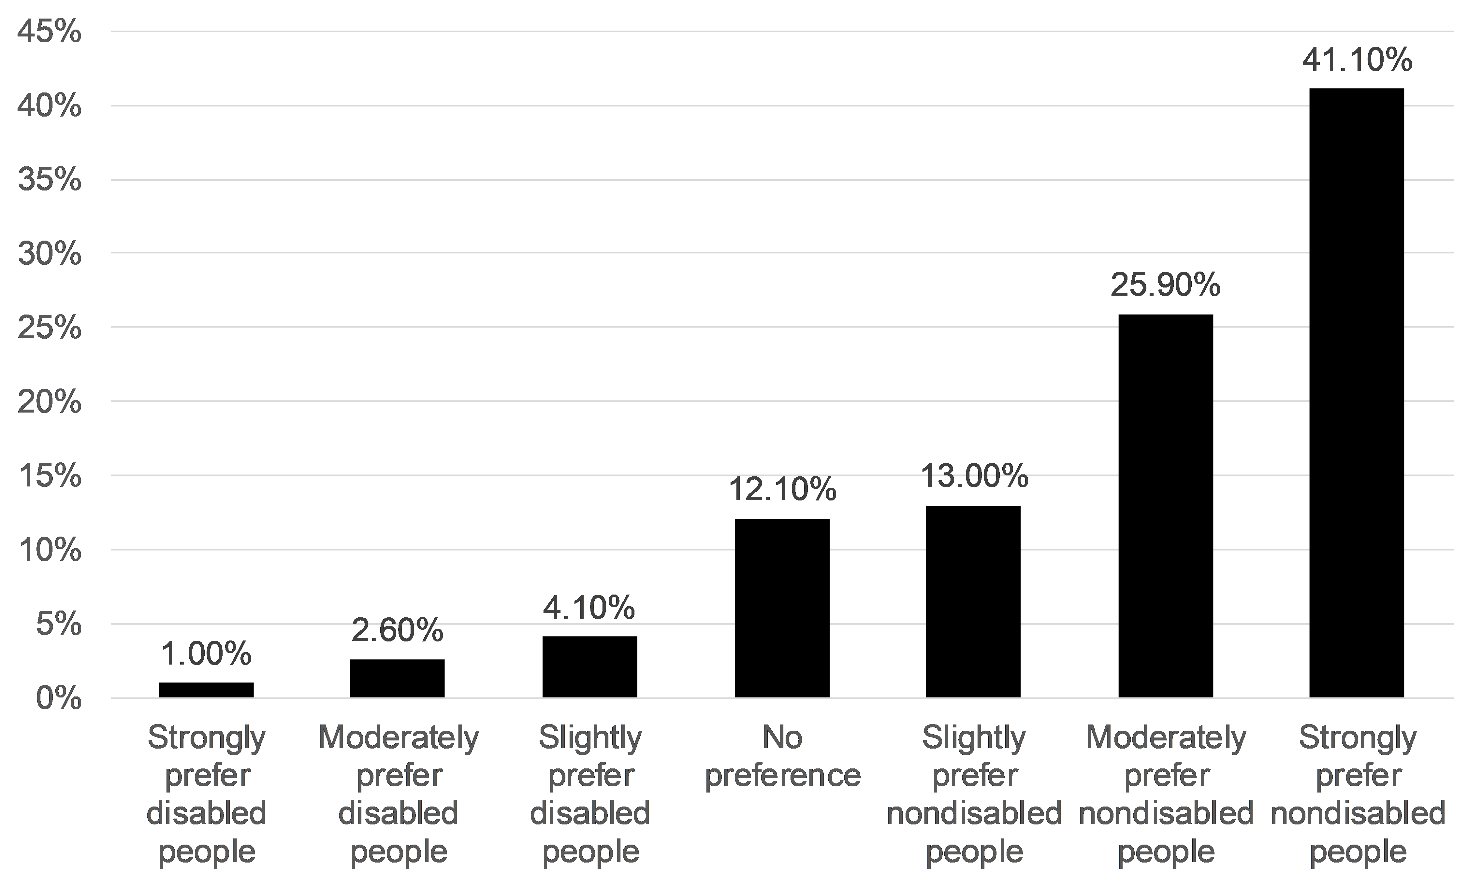 Figure 2. Distribution of participants’ implicit preferences for
              disabled or nondisabled people. The figure shows 1% of participants strongly
              preferred disabled people implicitly, 2.6% moderately preferred disabled
              people implicitly, and 4.1% slightly preferred disabled people implicitly.
              12.1% of participants had no preference for disabled or nondisabled people
              implicitly. 13.0% of participants slightly preferred nondisabled people
              implicitly, 25.9% moderately preferred nondisabled people implicitly, and
              41.1% strongly preferred nondisabled people implicitly.